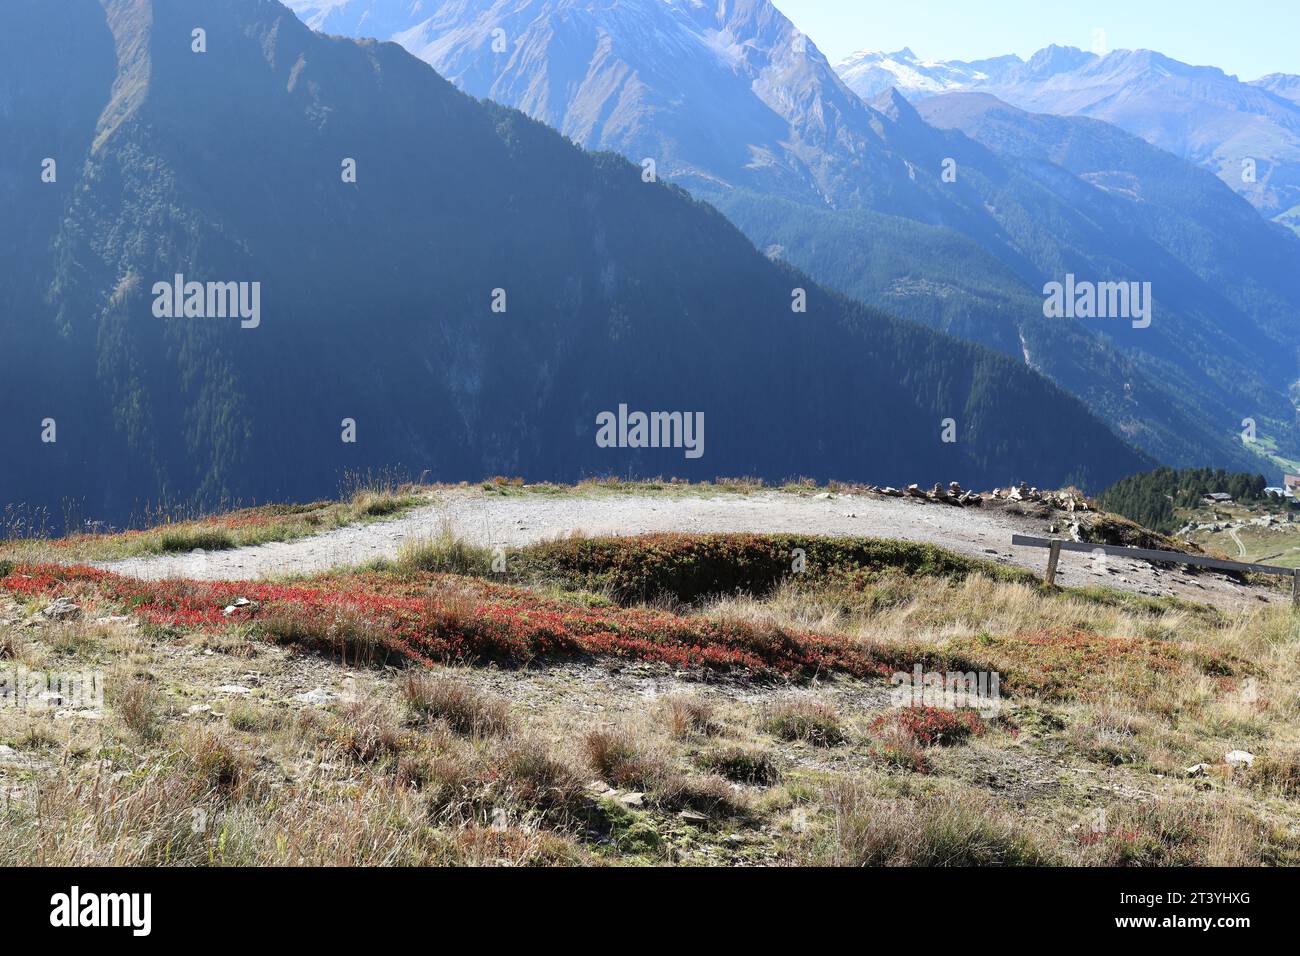 Wide-angle view of a sunlit hiking trail in the Austrian Alps against an impressive mountain backdrop Stock Photo